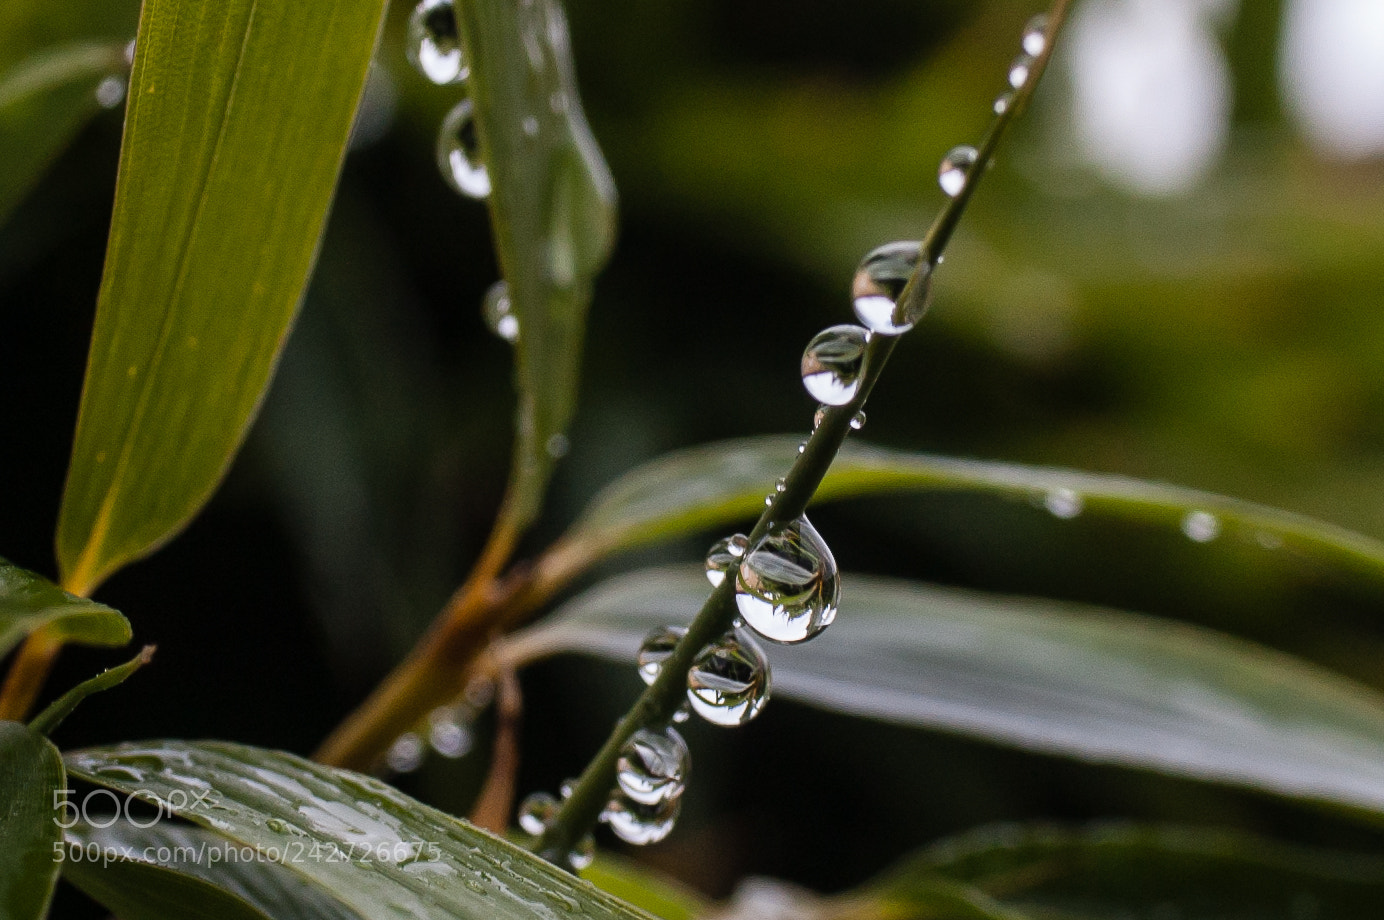 Nikon D40 sample photo. Droplets on bamboo leafs photography